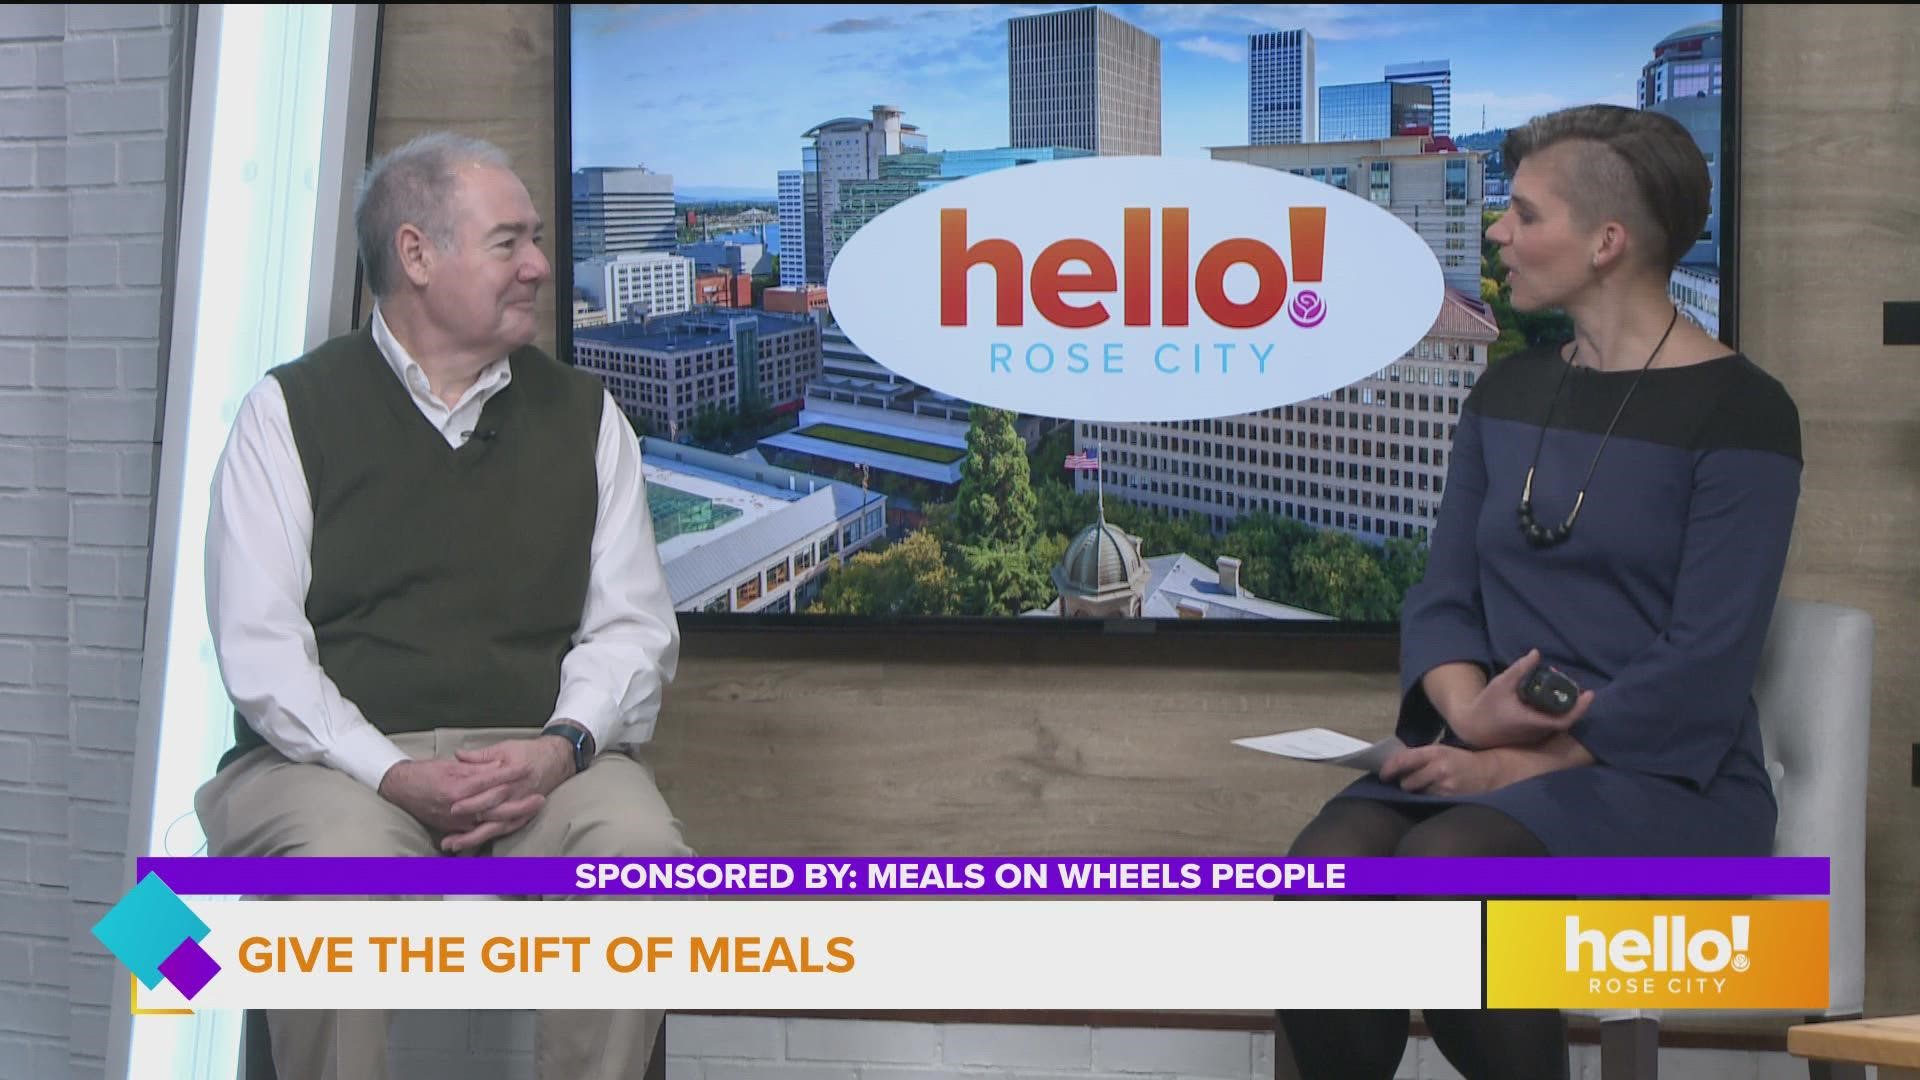 This segment is sponsored by Meals on Wheels People